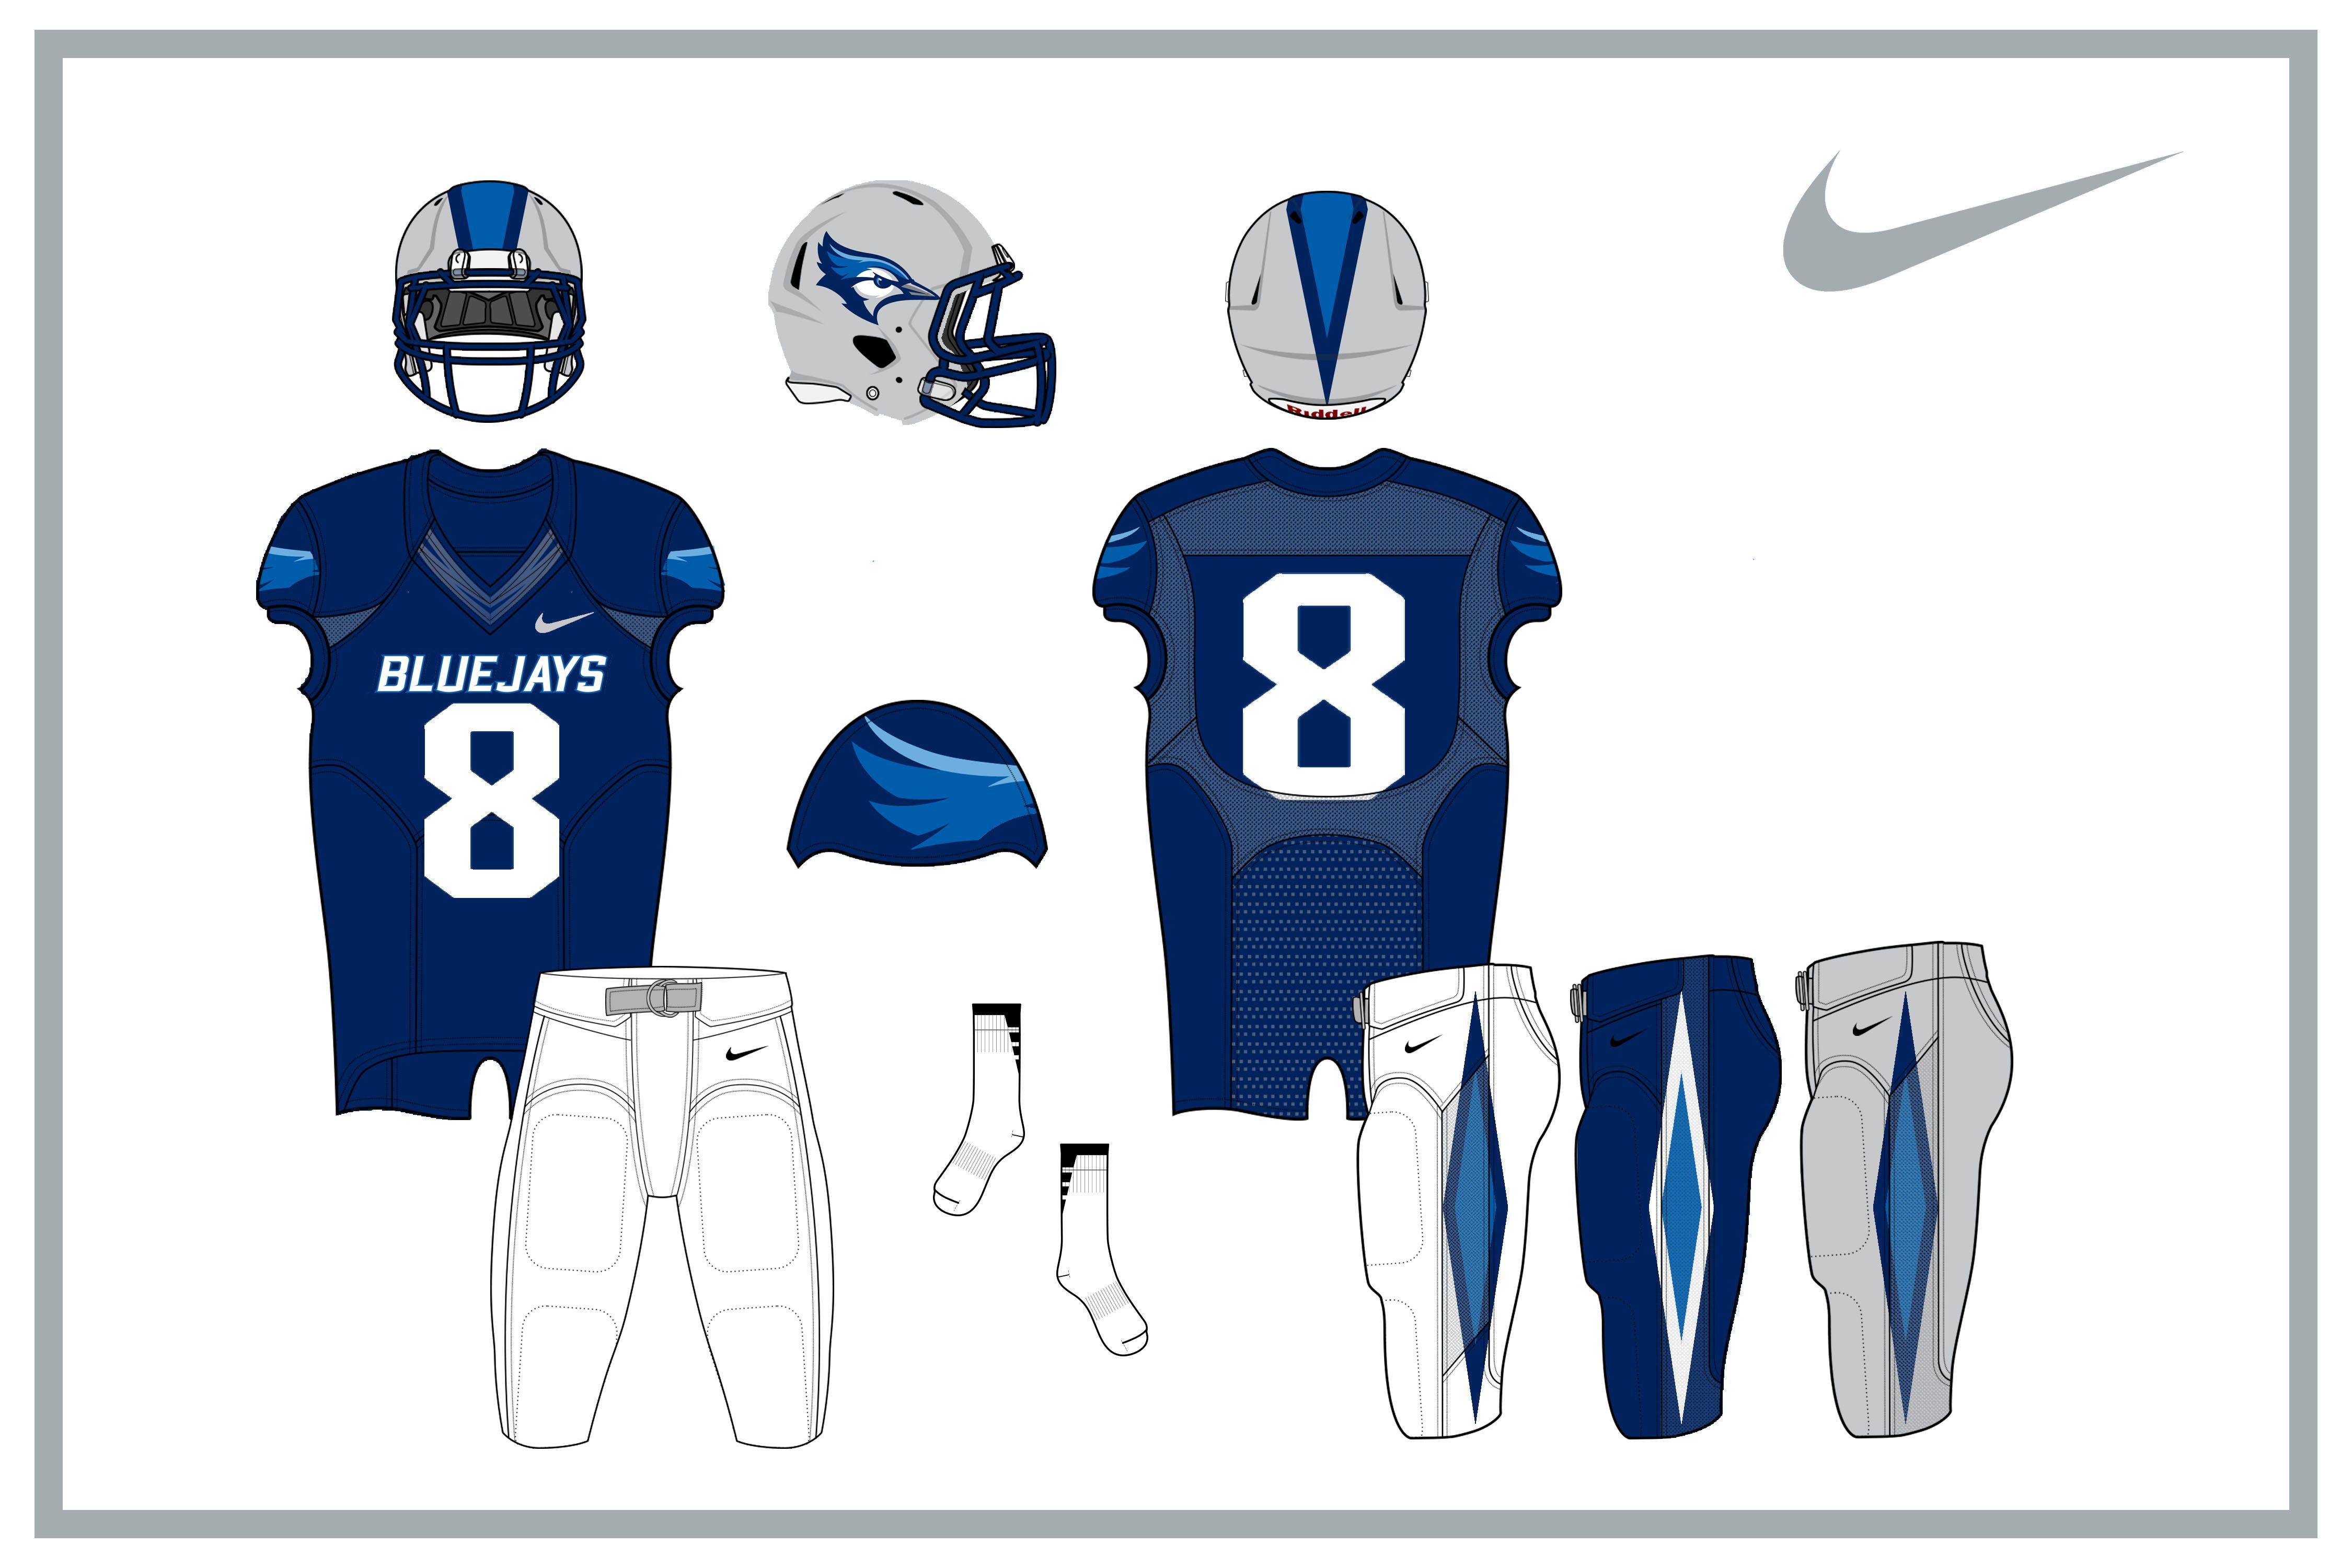 Creighton Football Logo - concepts for D1 colleges without football teams